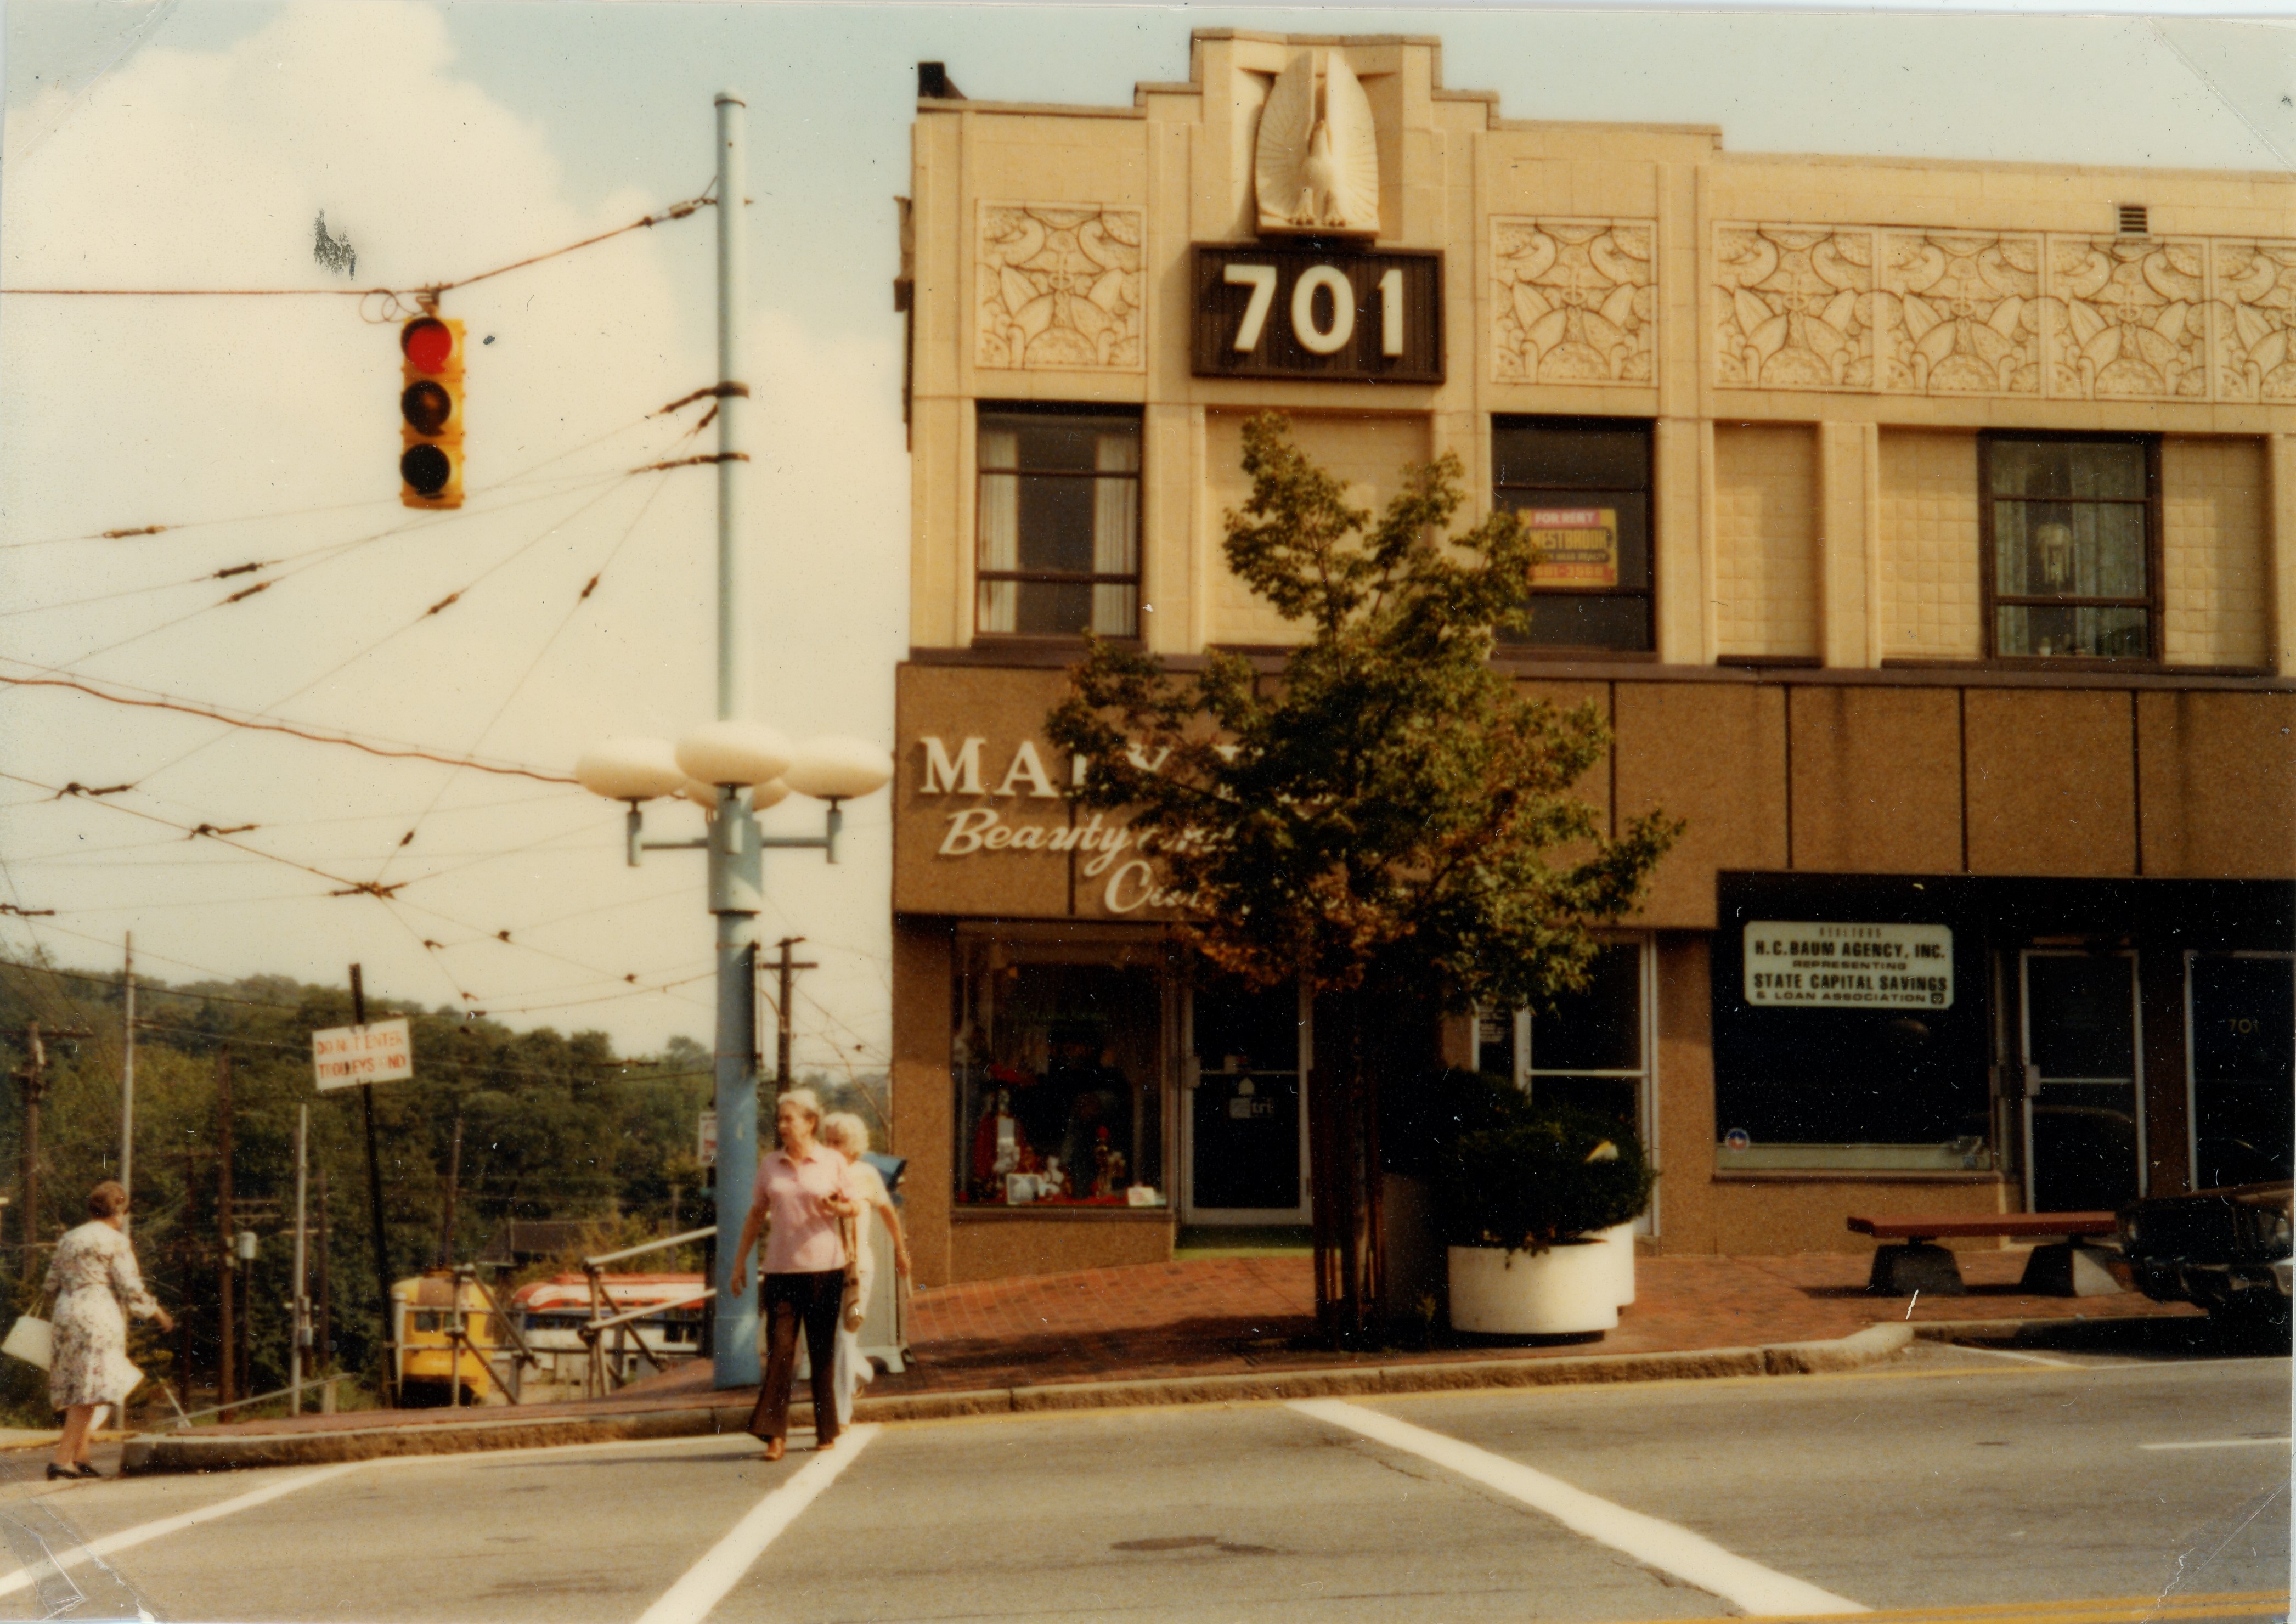 Street view of a light tan and reddish brown building with larger numbers on the front reading 701